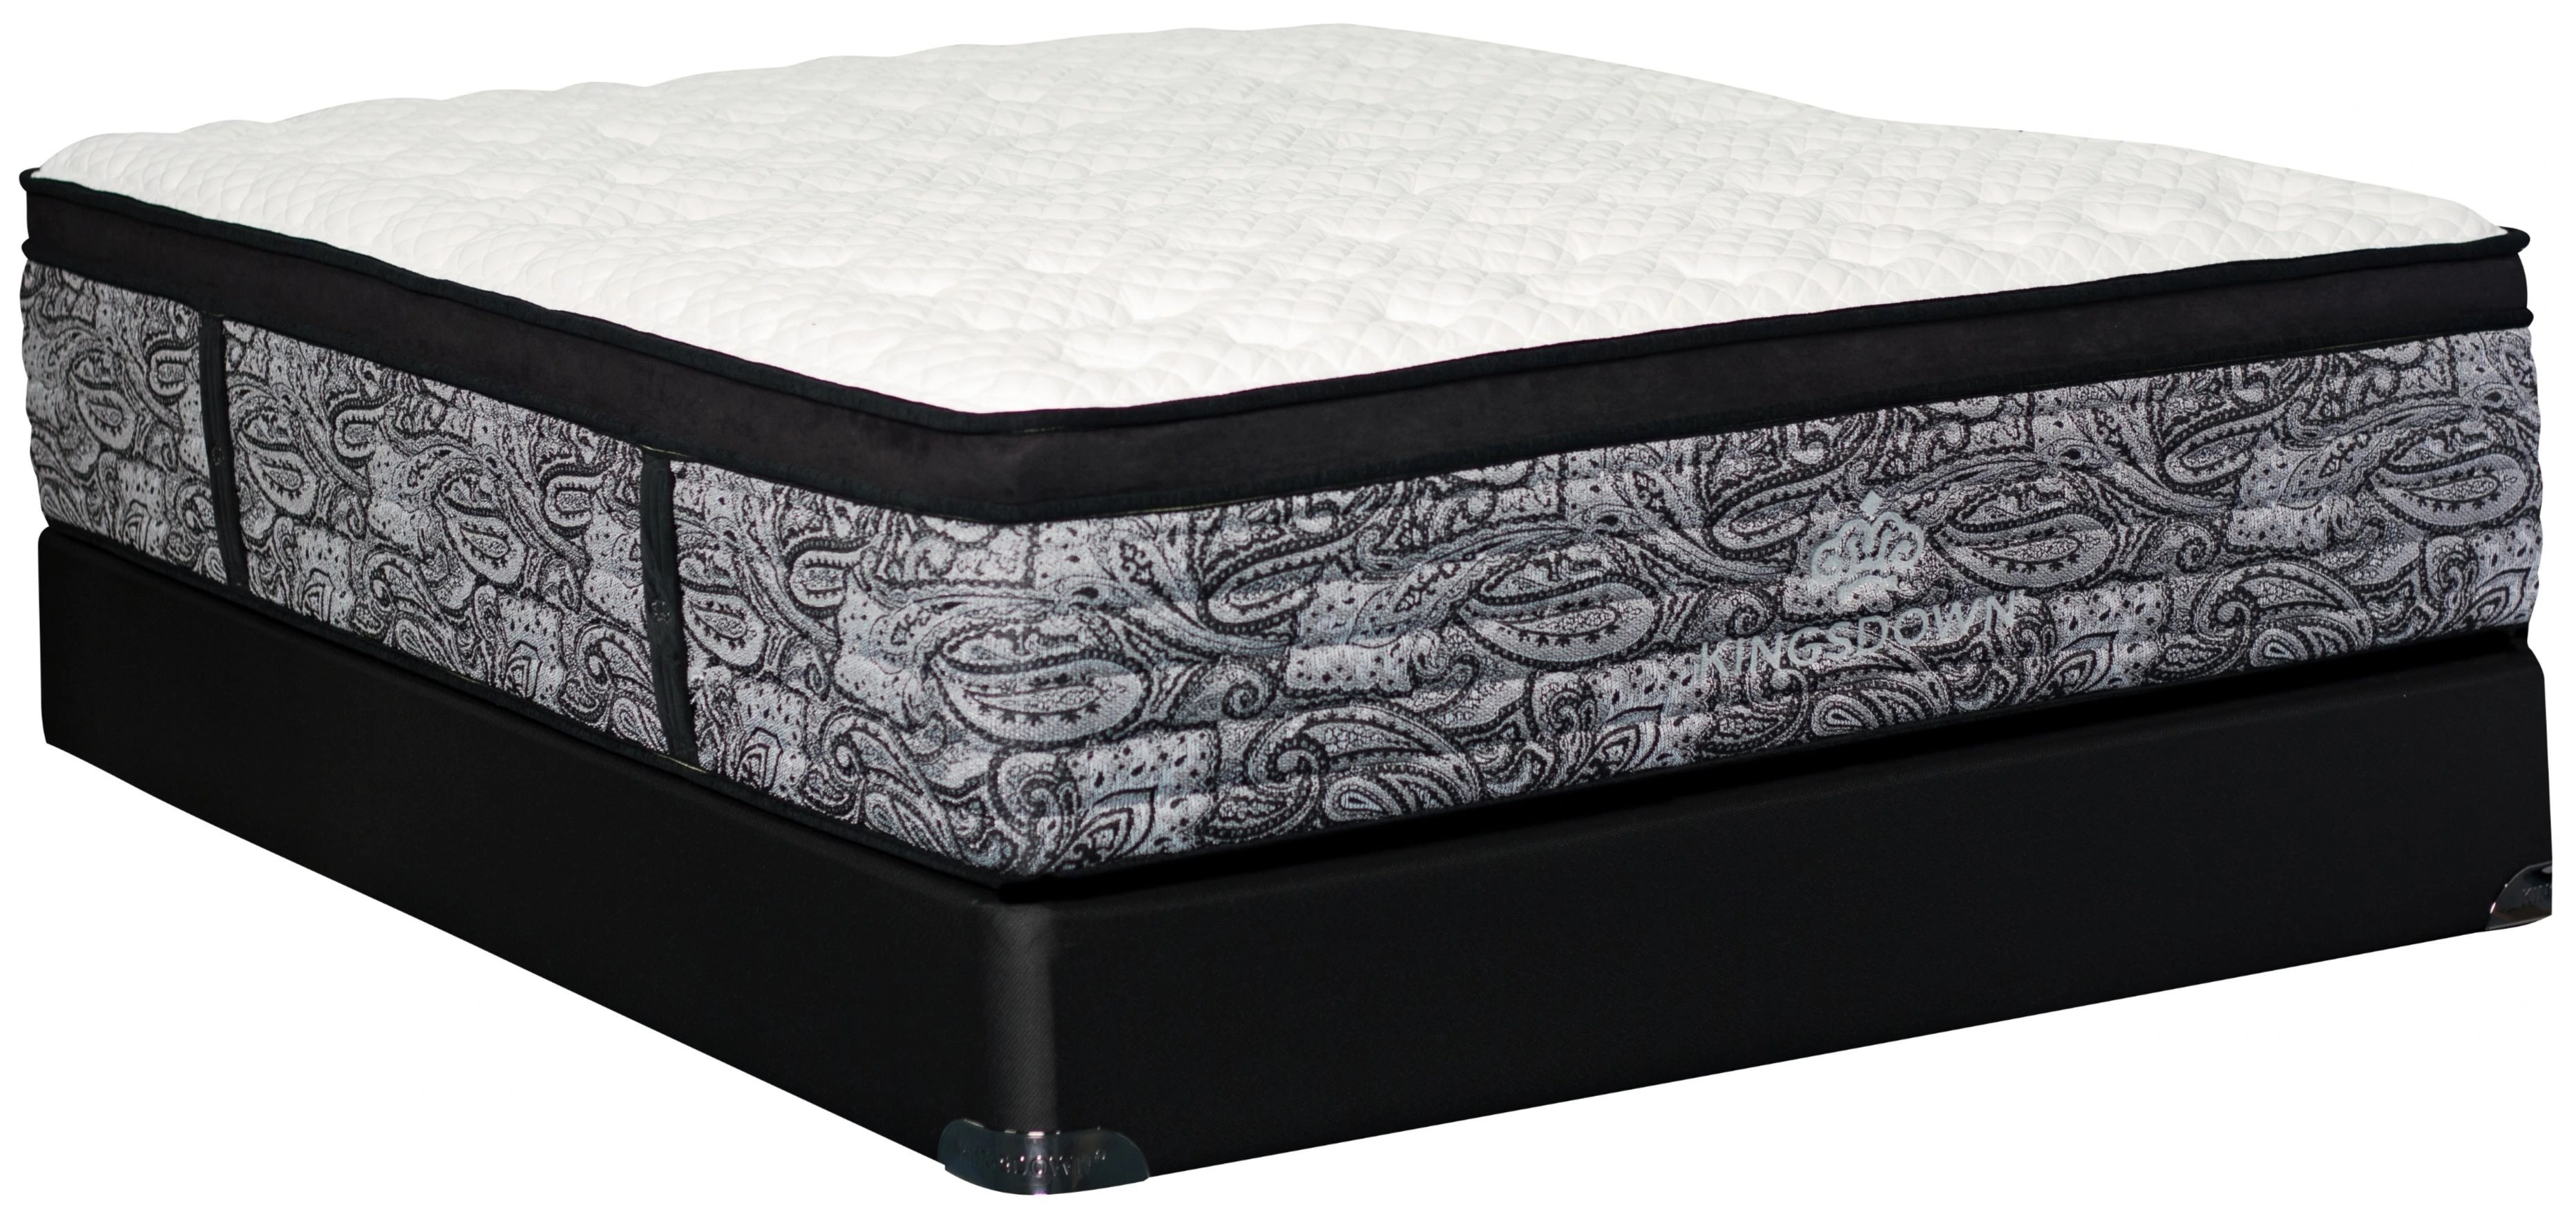 Side view of Kingsdown Crown Imperial Empire firm queen-size Euro top mattress 